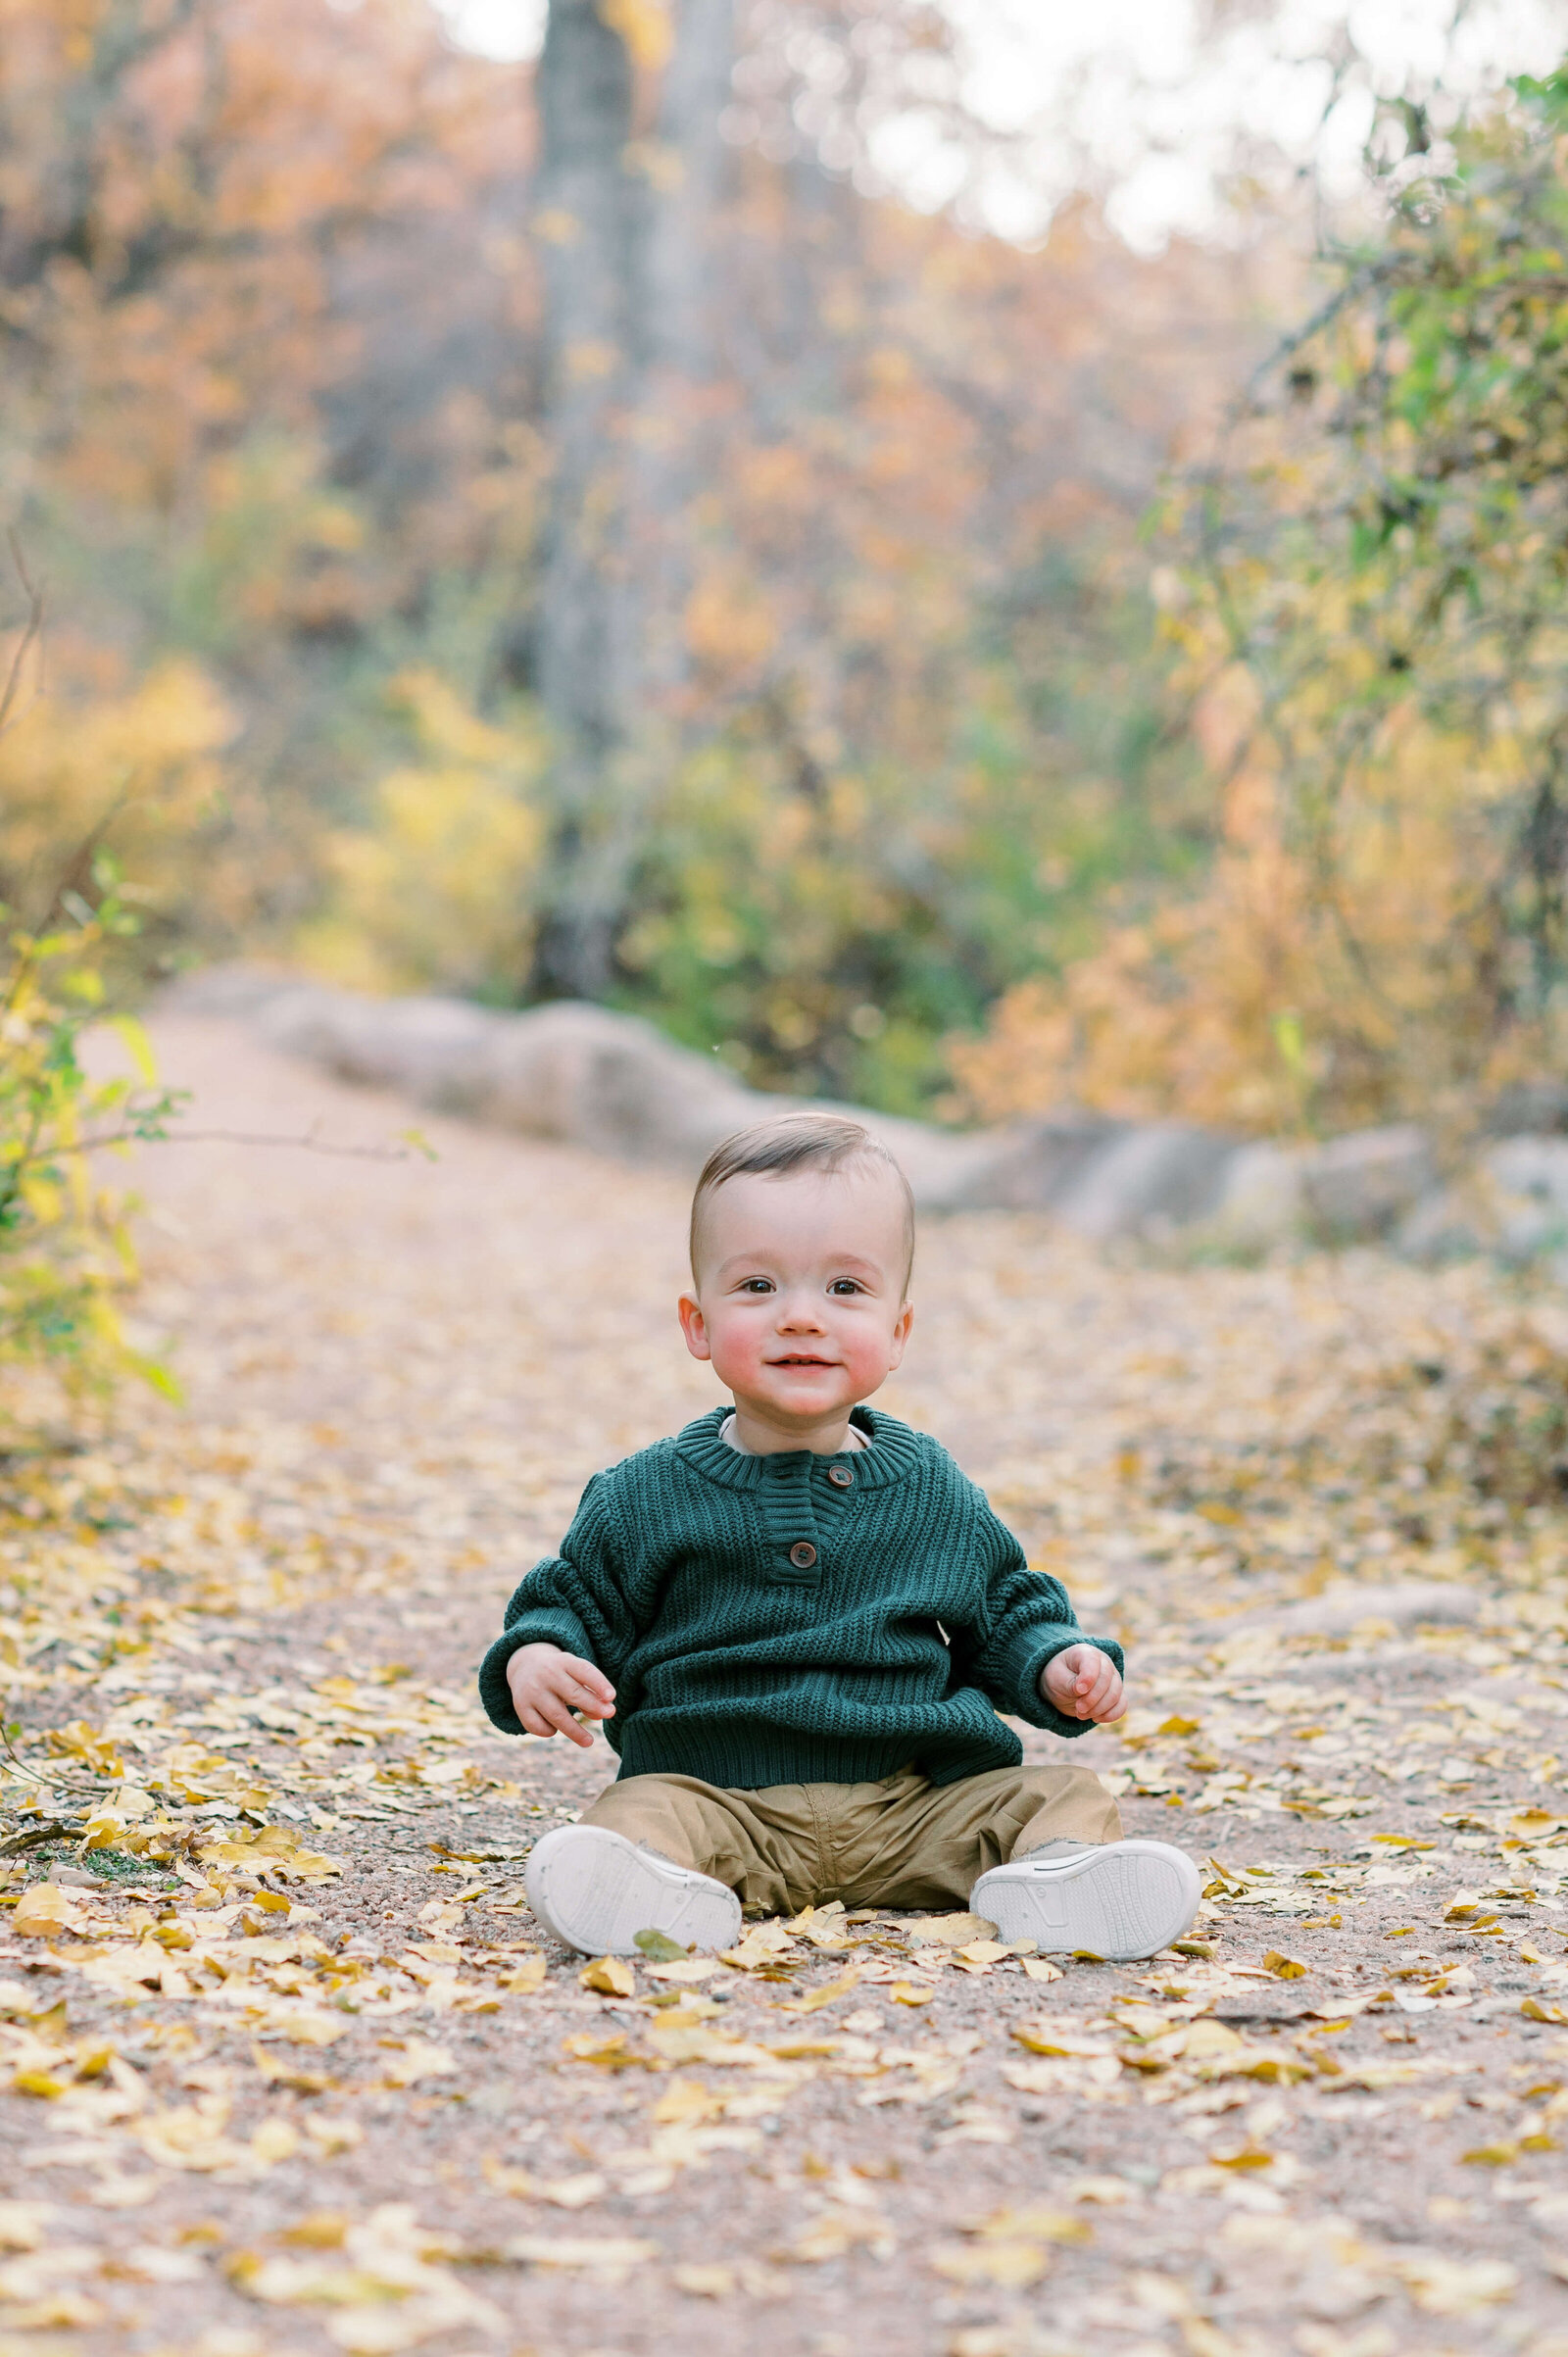 A young baby wearing a green sweater and tan pants sits on a path that is covered with fall leaves